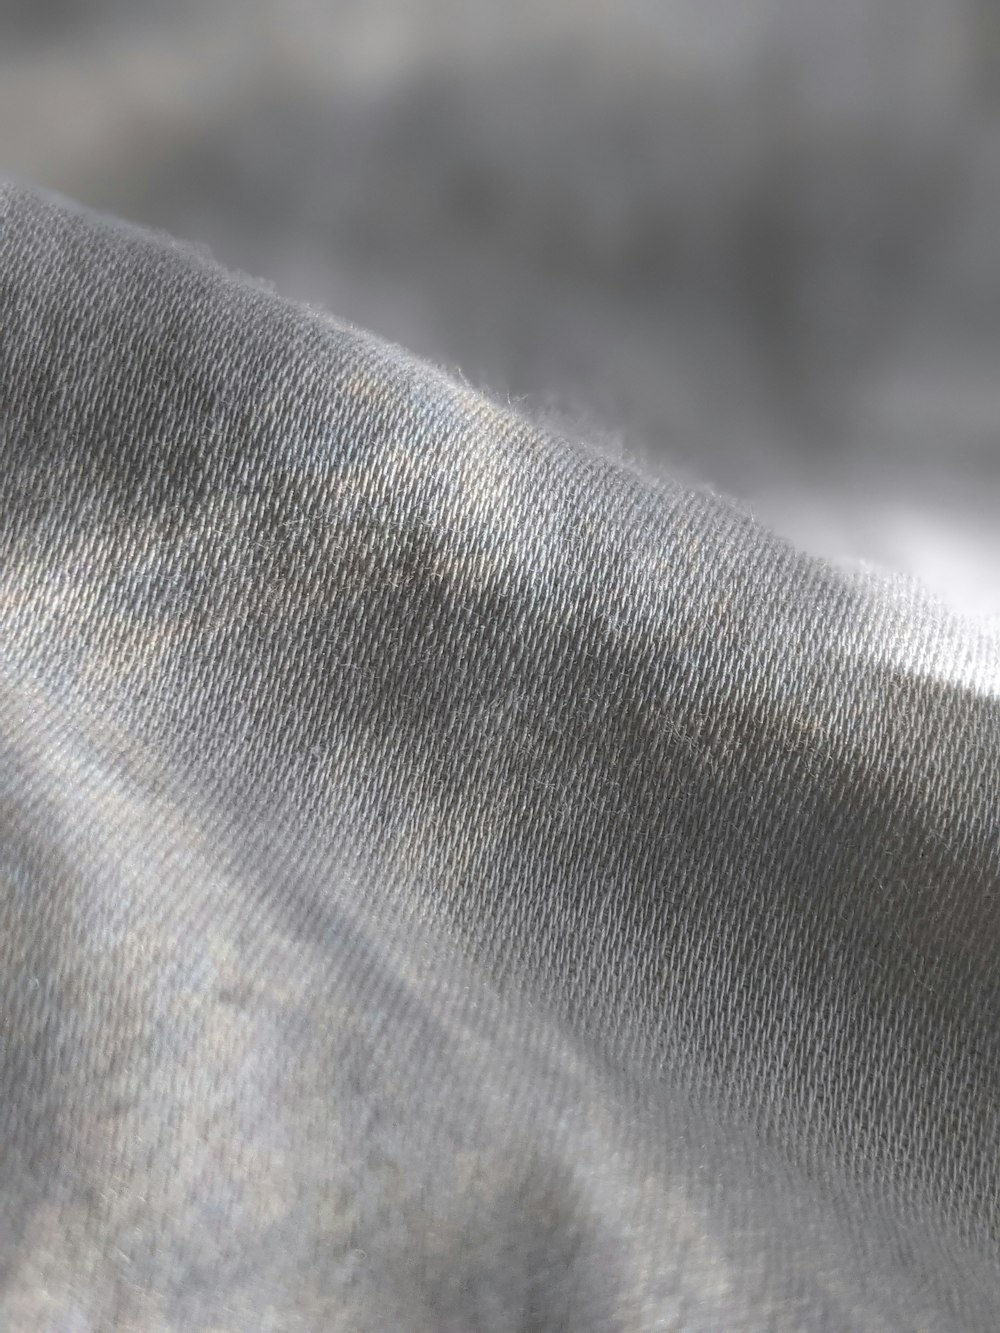 a close up of a gray fabric with a blurry background